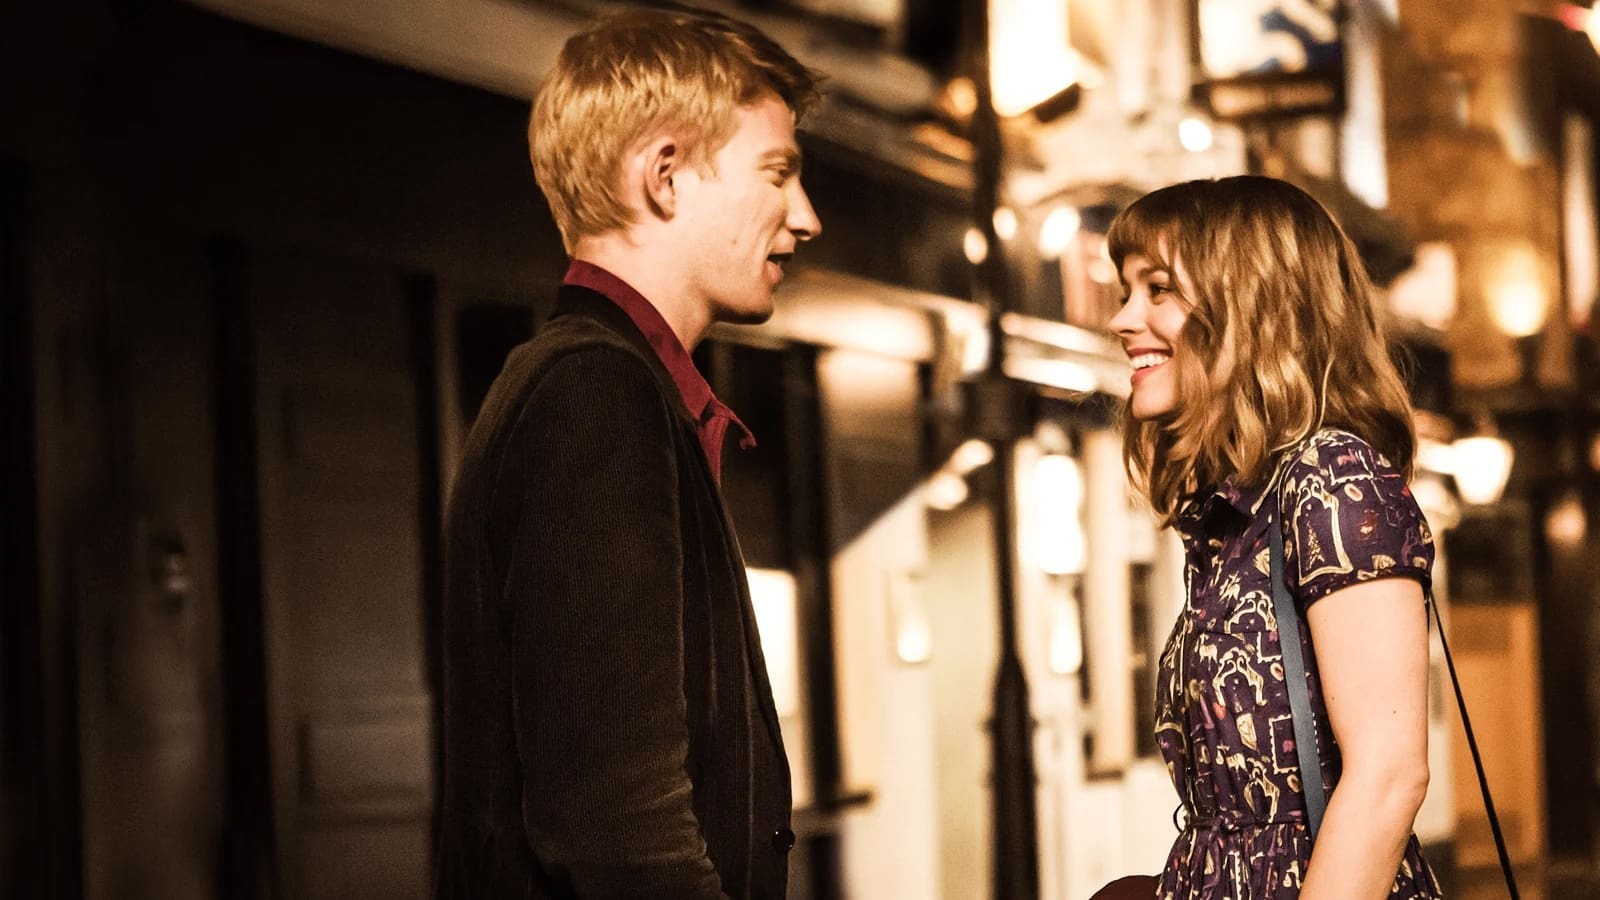 About Time 2013 123movies